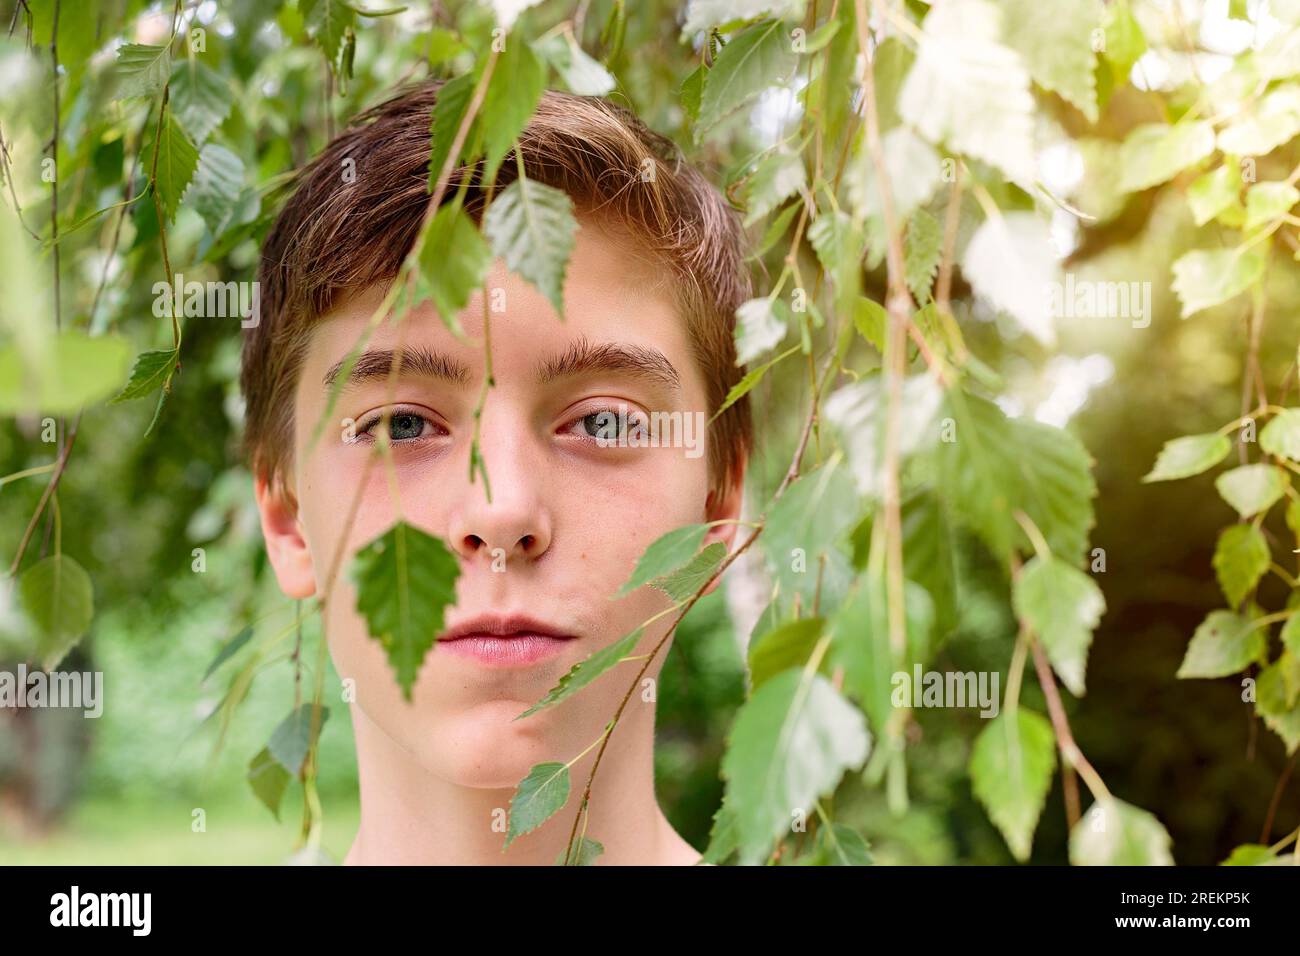 Portrait of a teenage boy hidden by some leaves Stock Photo